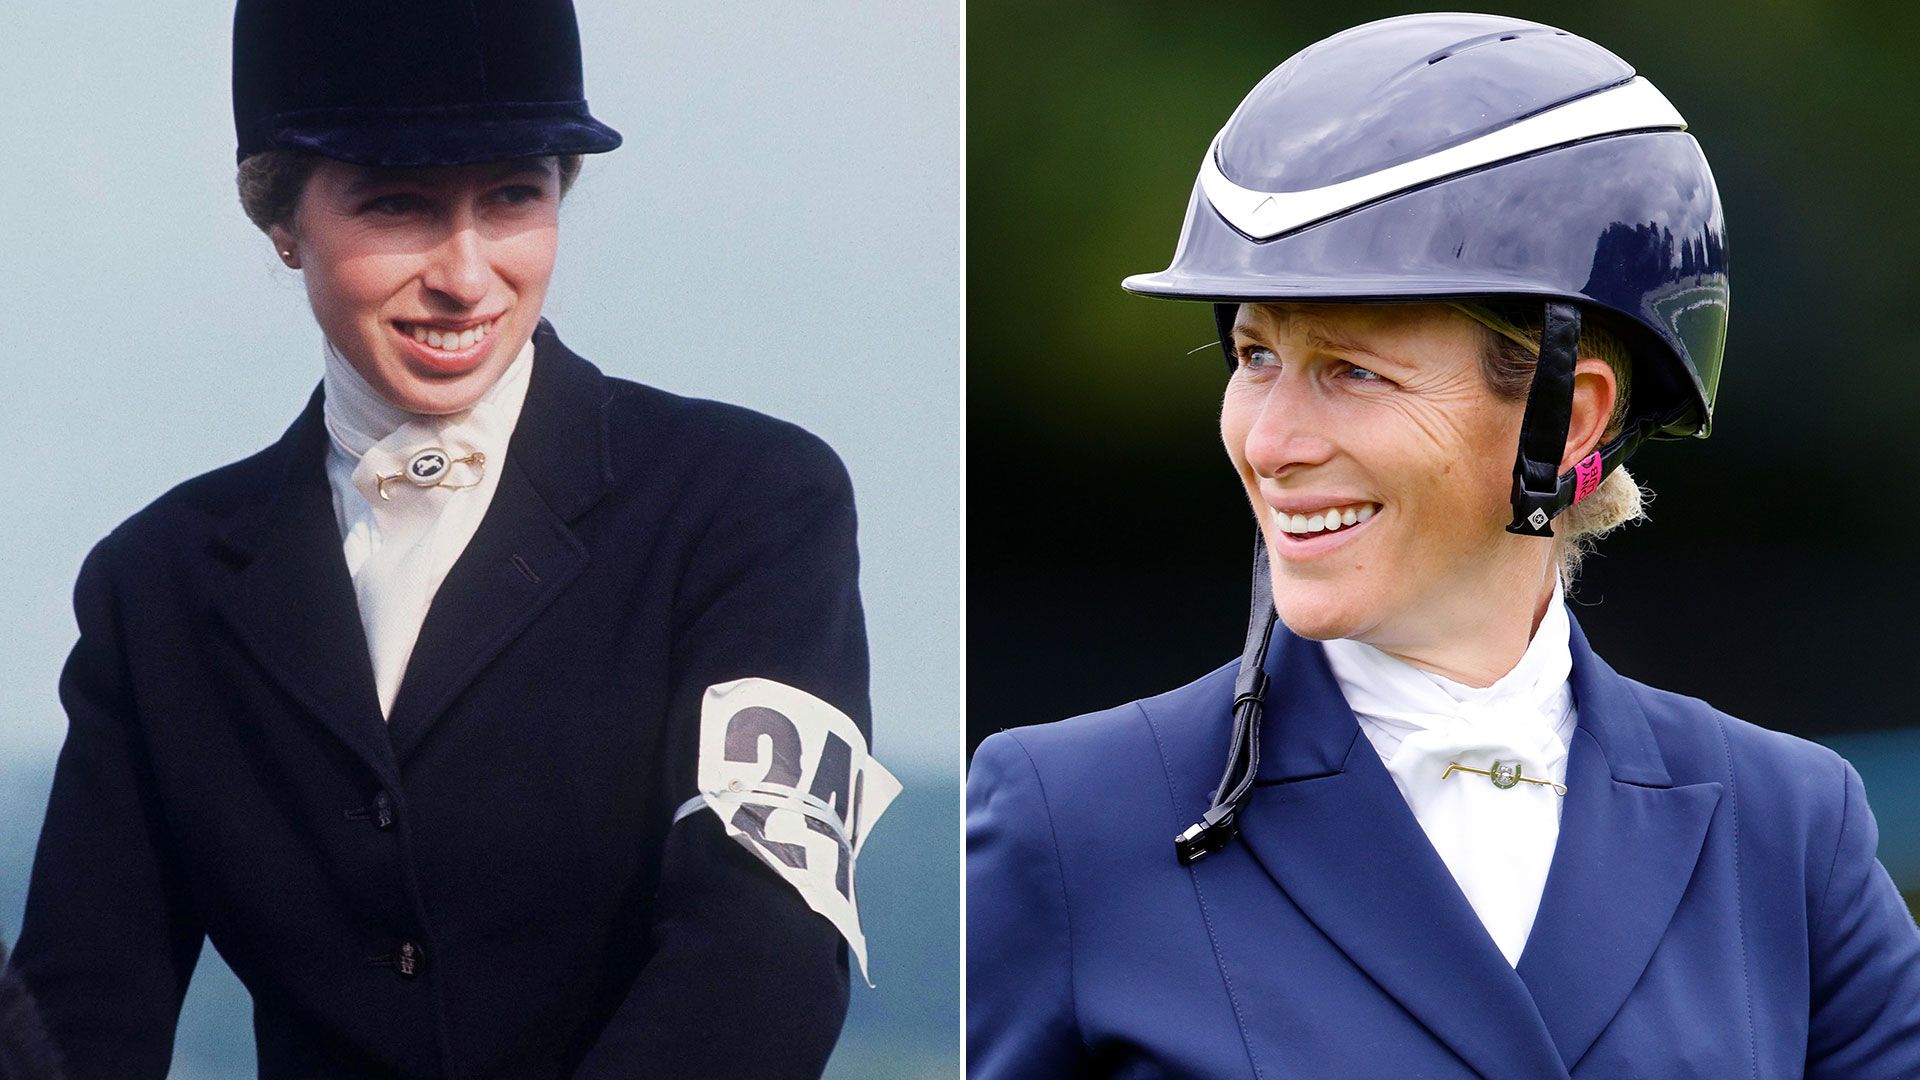 Jodhpur-clad Princess Anne looked just like daughter Zara Tindall in unearthed photo